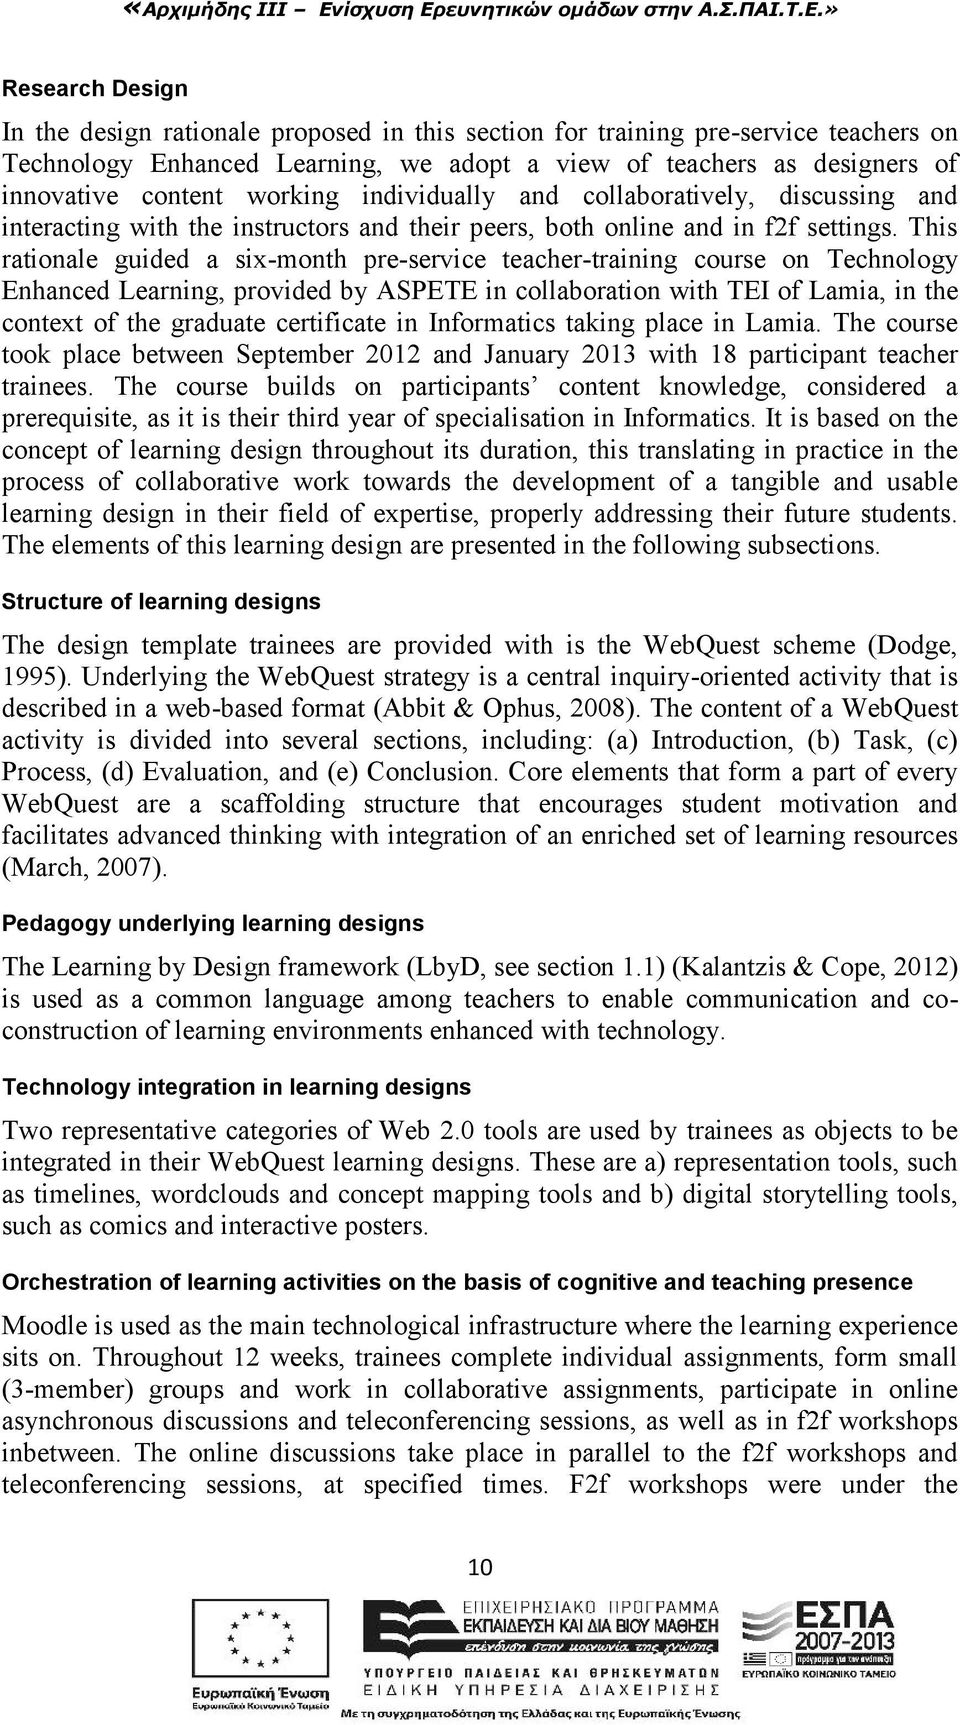 This rationale guided a six-month pre-service teacher-training course on Technology Enhanced Learning, provided by ASPETE in collaboration with TEI of Lamia, in the context of the graduate